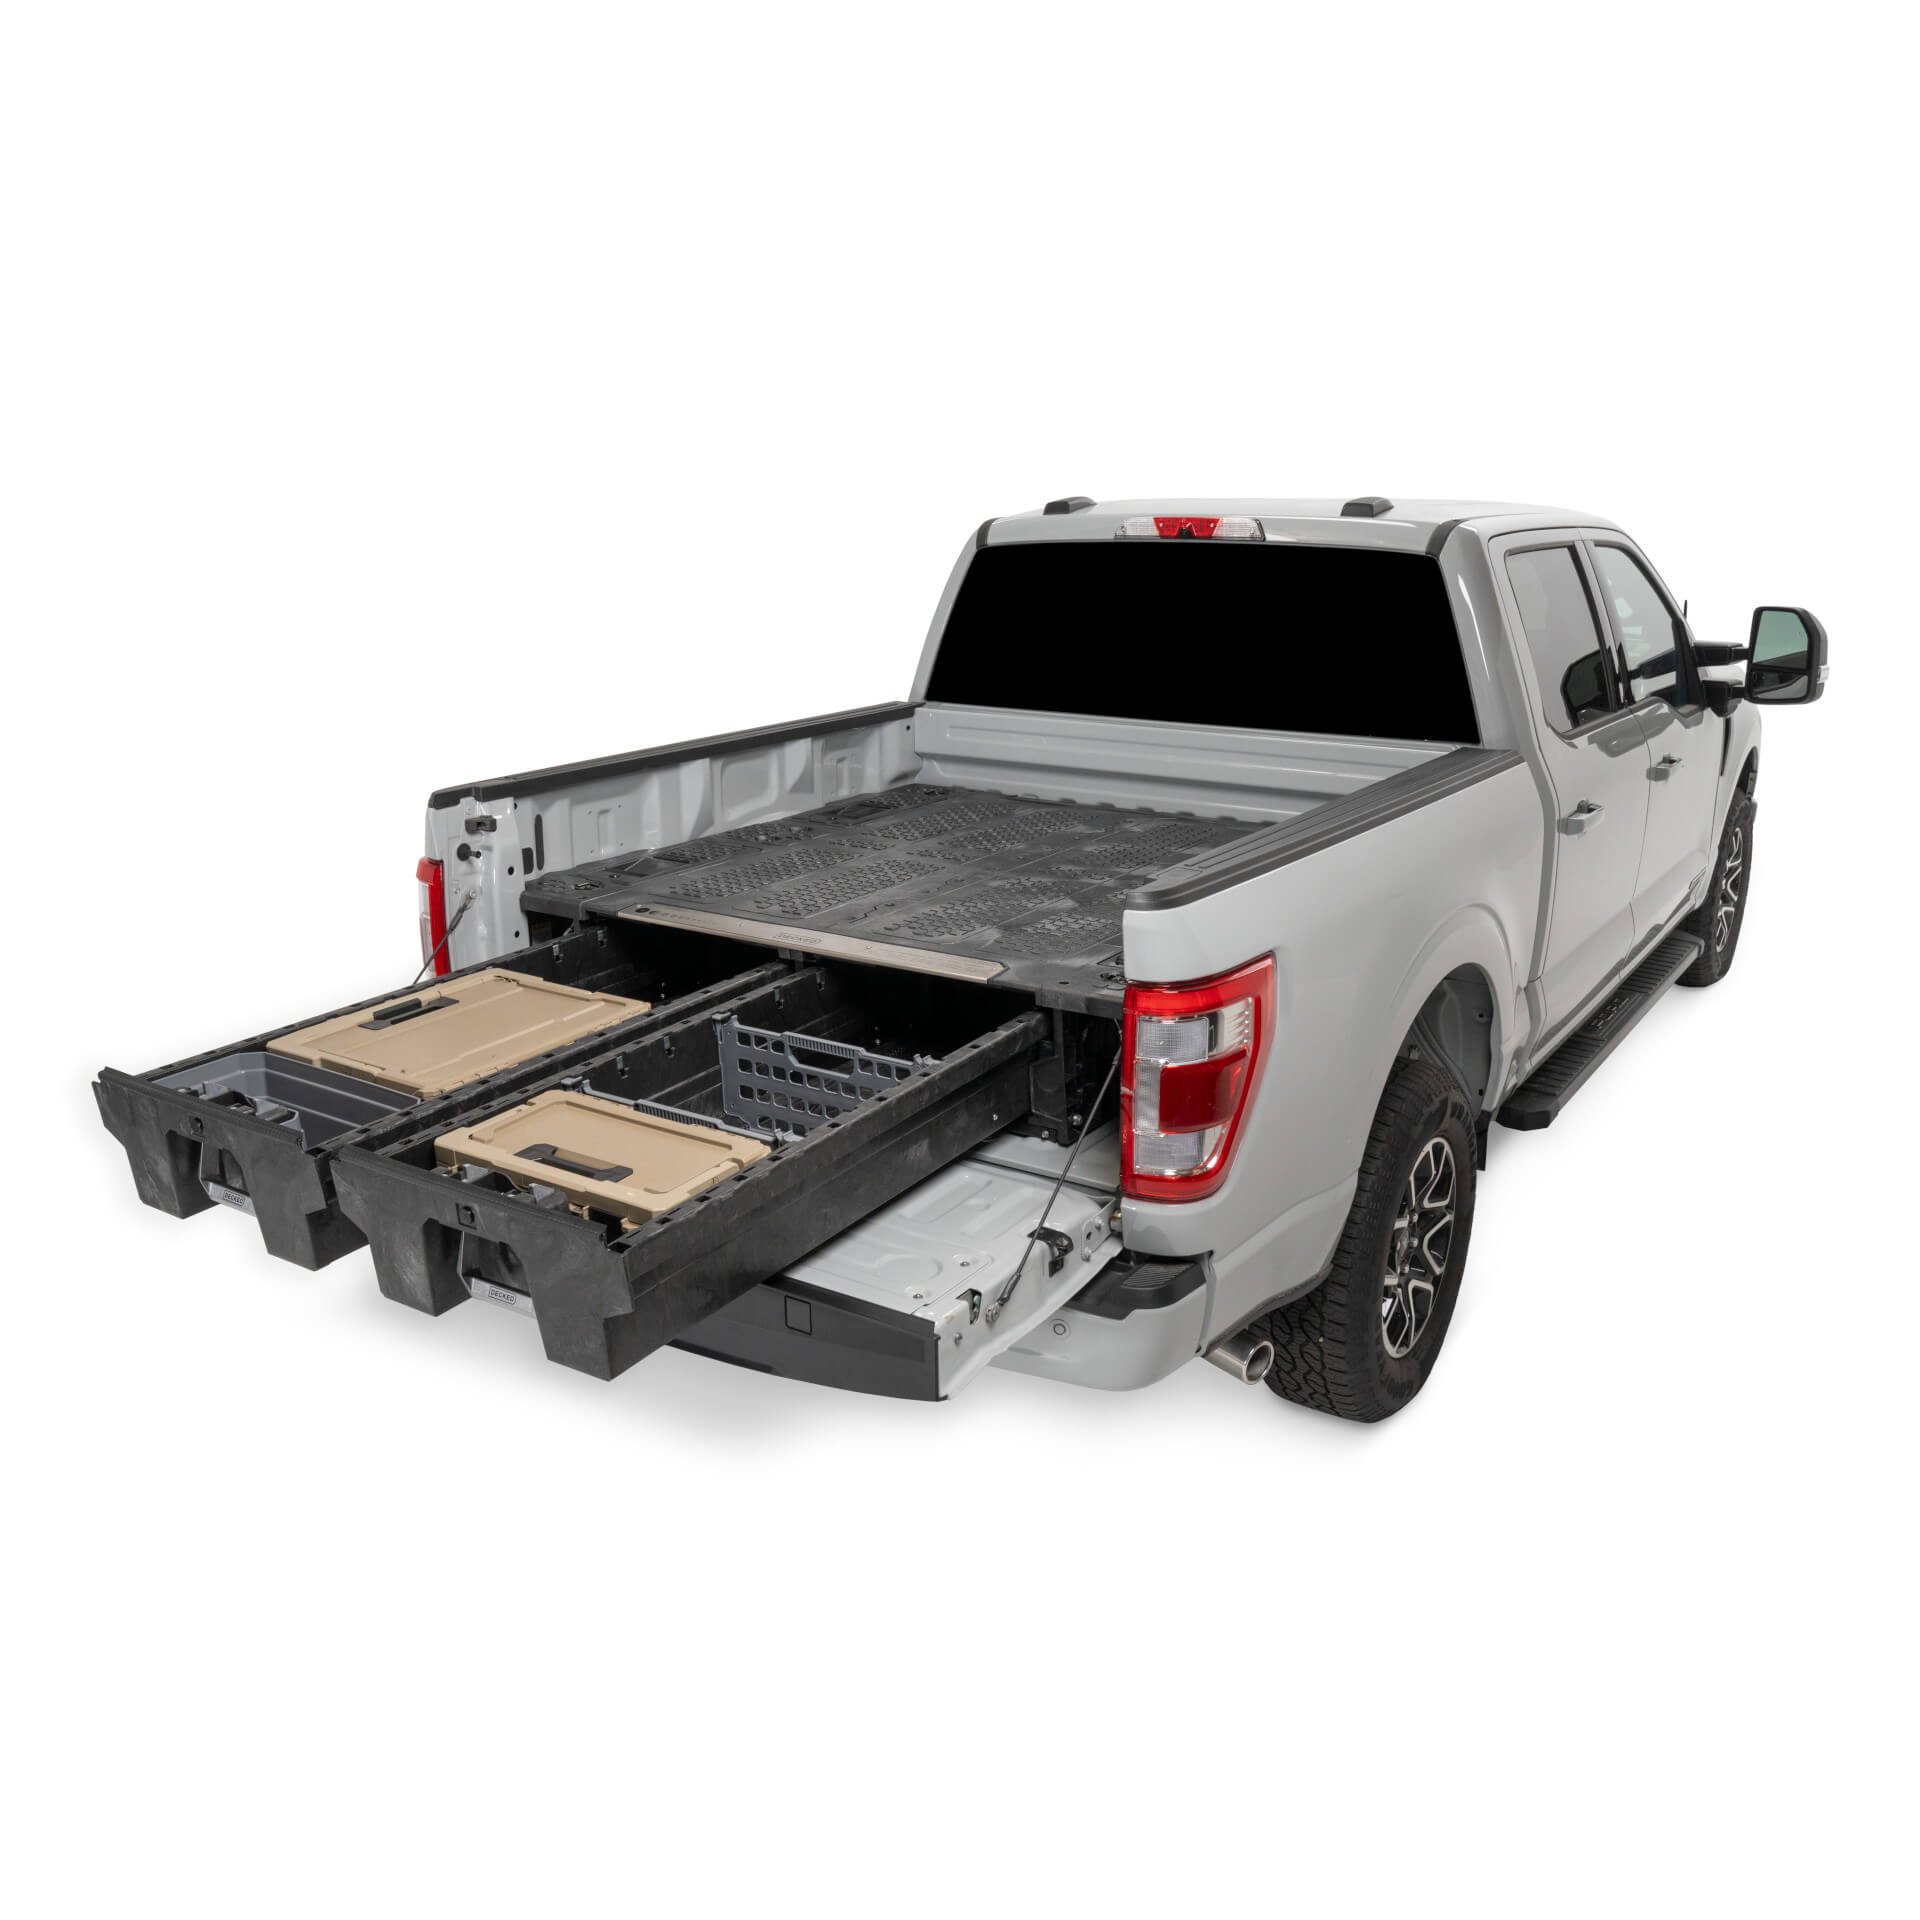 DECKED SYSTEM FORD F150 ALUMINUM 5'6" 2015-